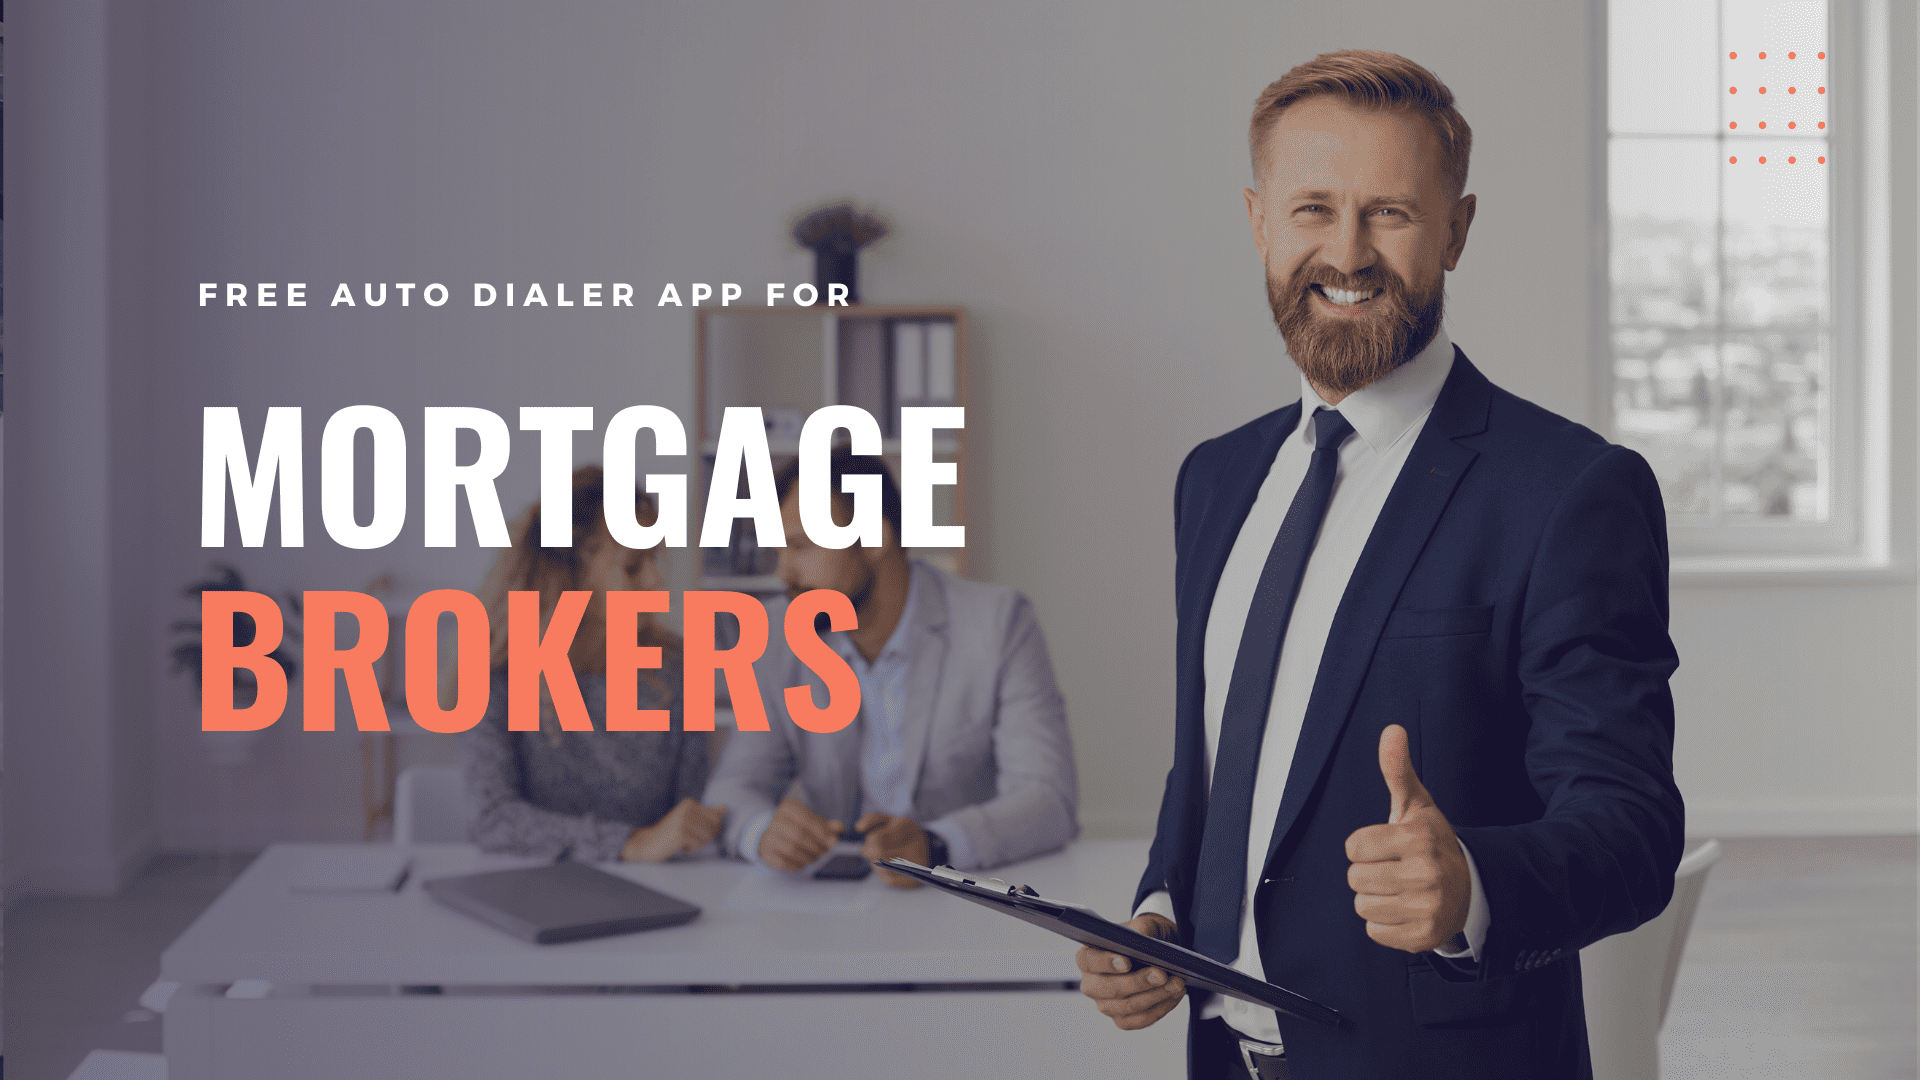 Free Auto Dealer app for Mortgage Brokers